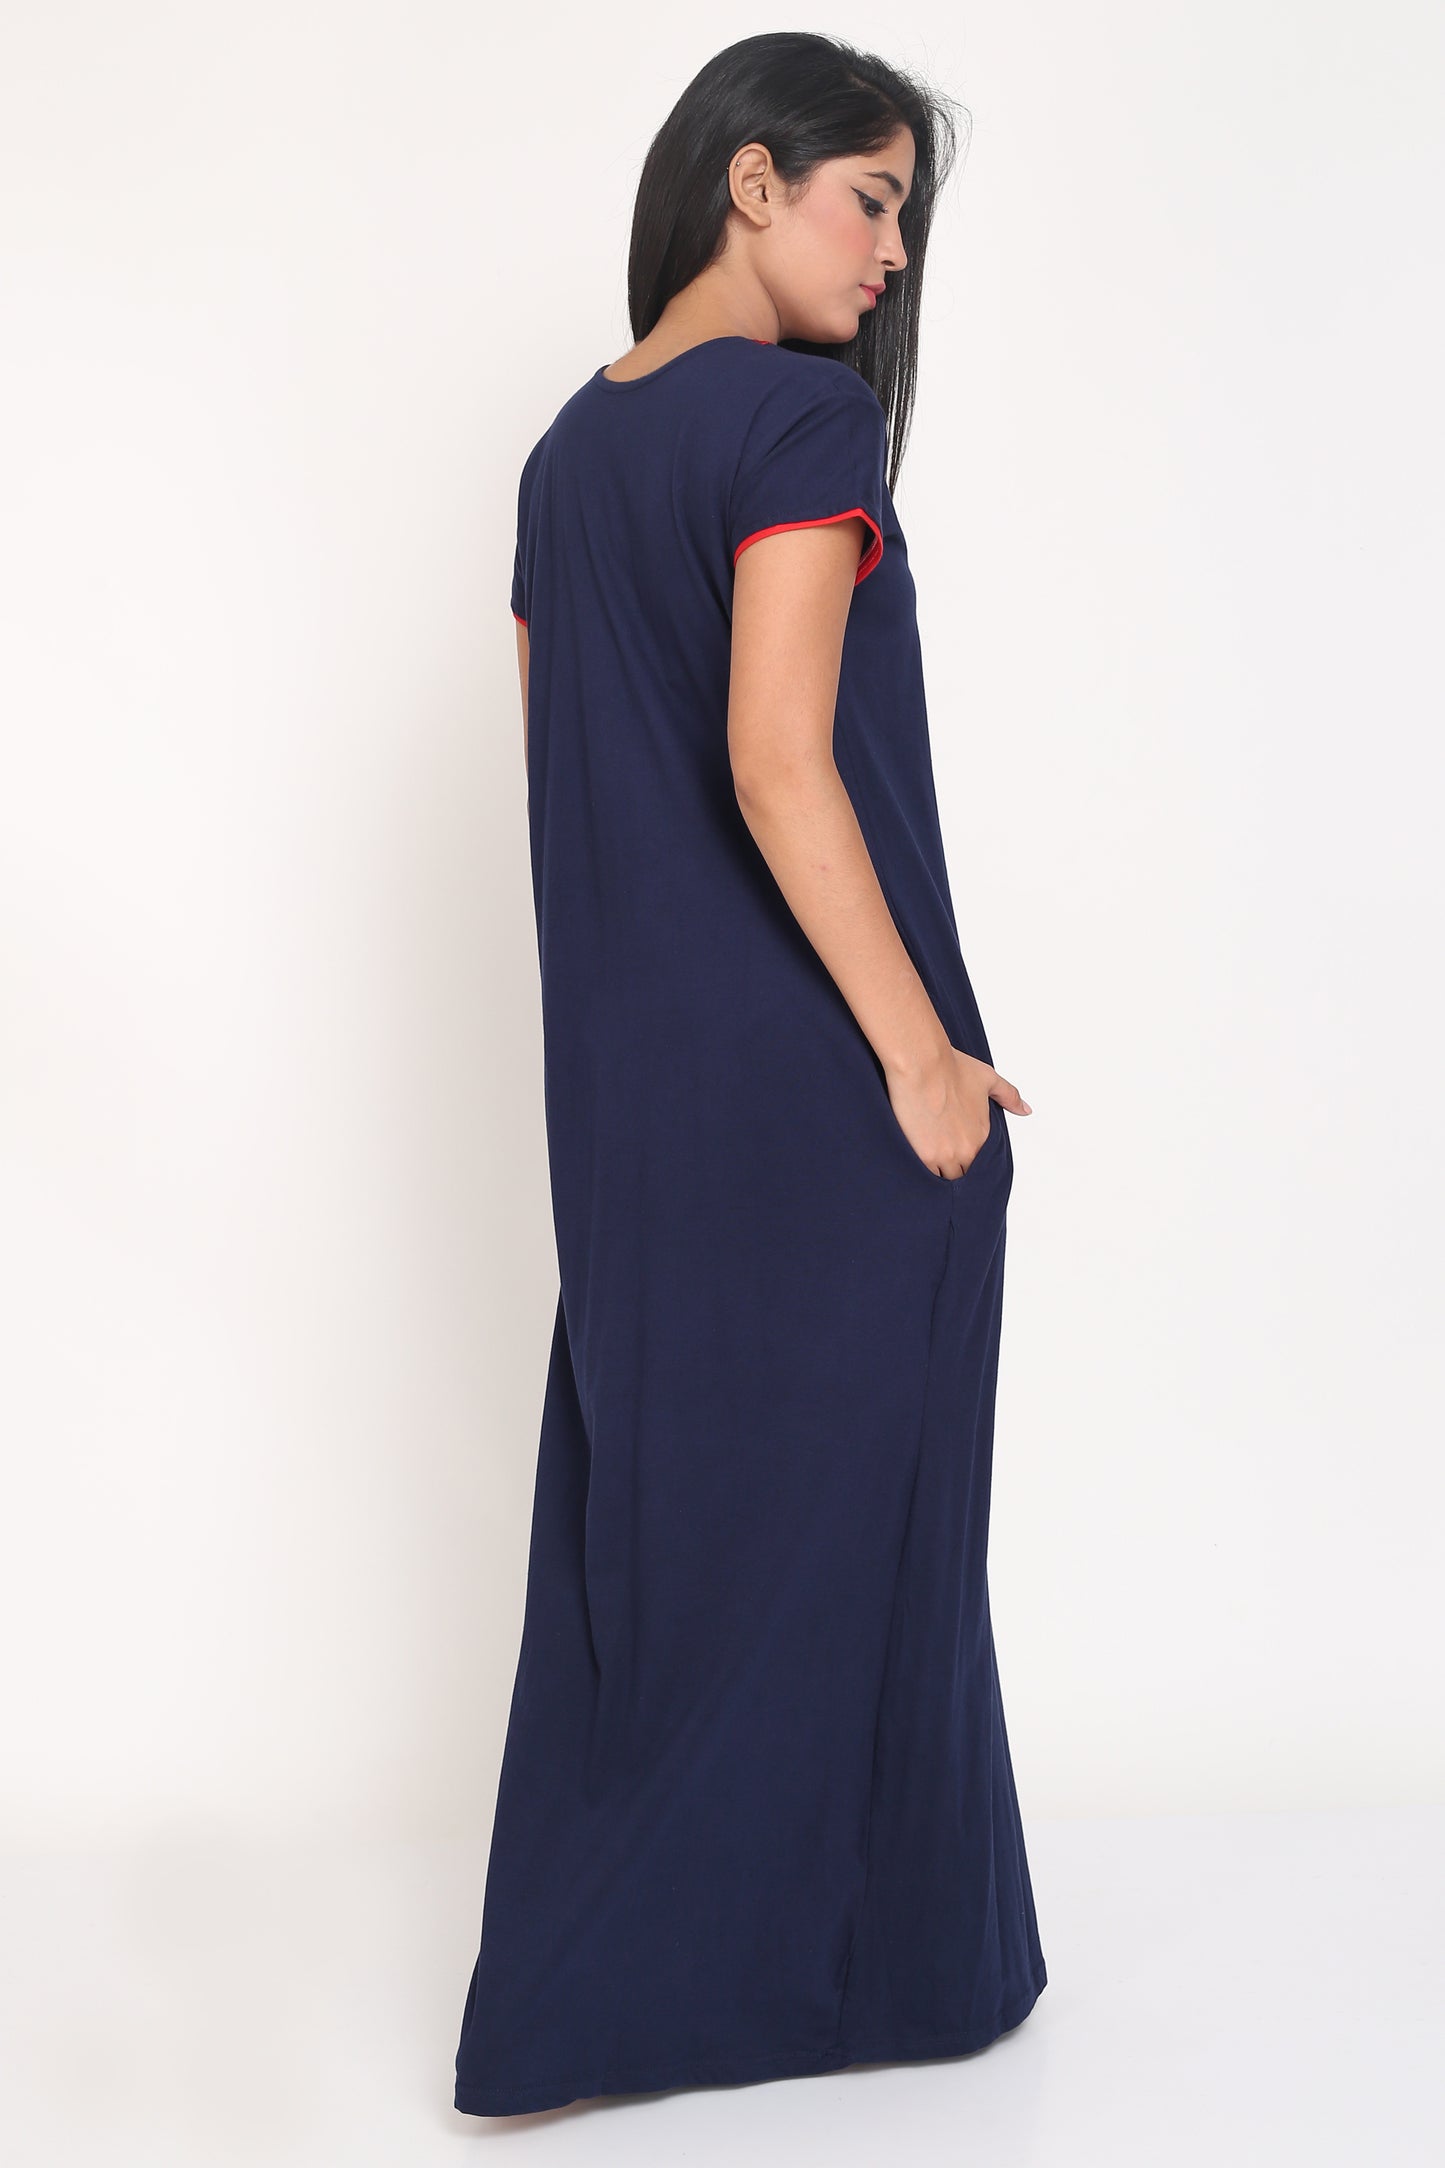 Women's Hosiery Navy Blue Plain Maxi Nightgown with Embroidery Neck